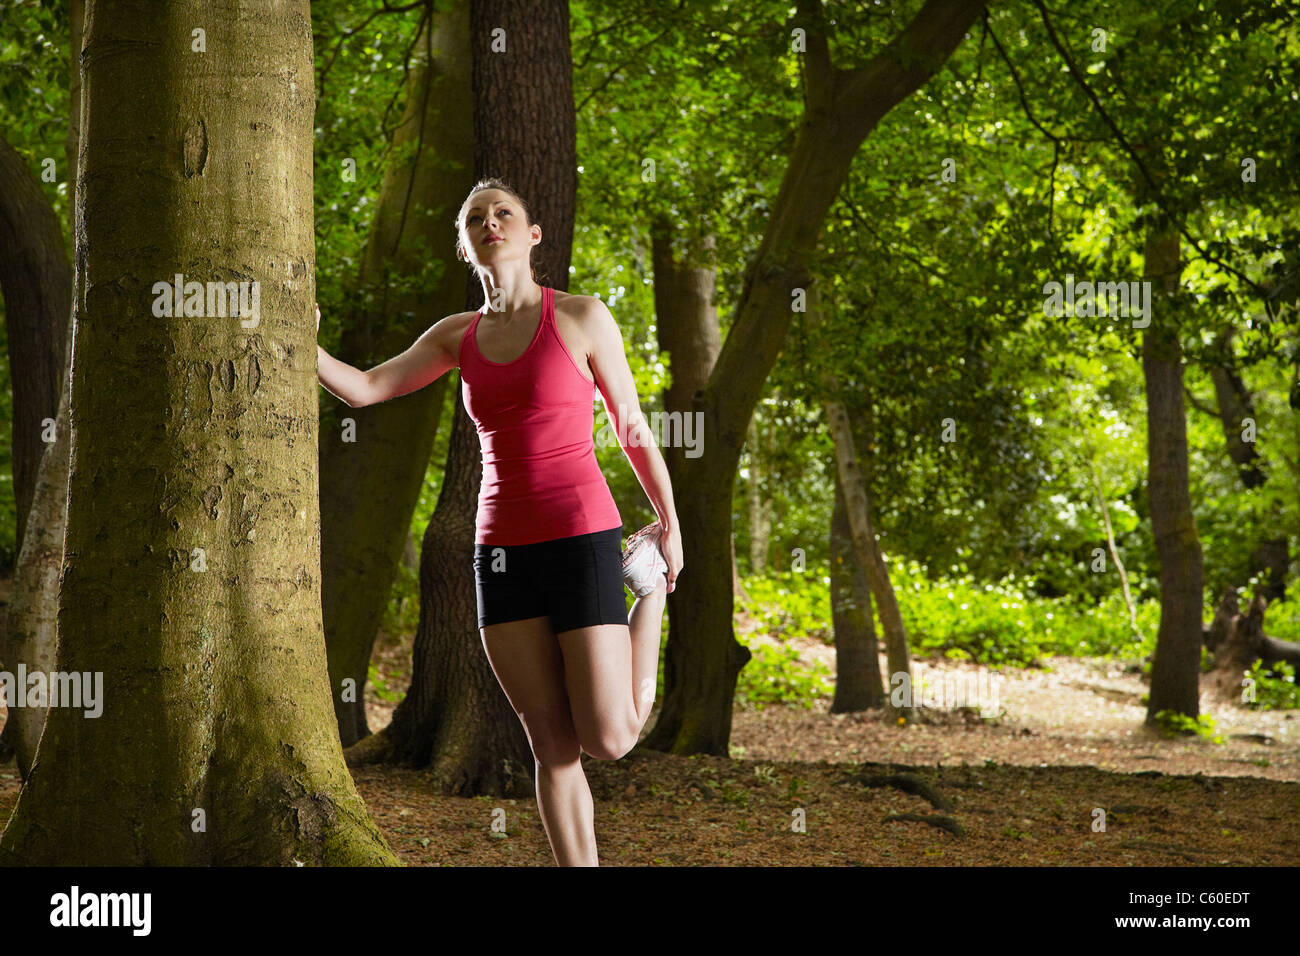 Jogger stretching in forest Banque D'Images